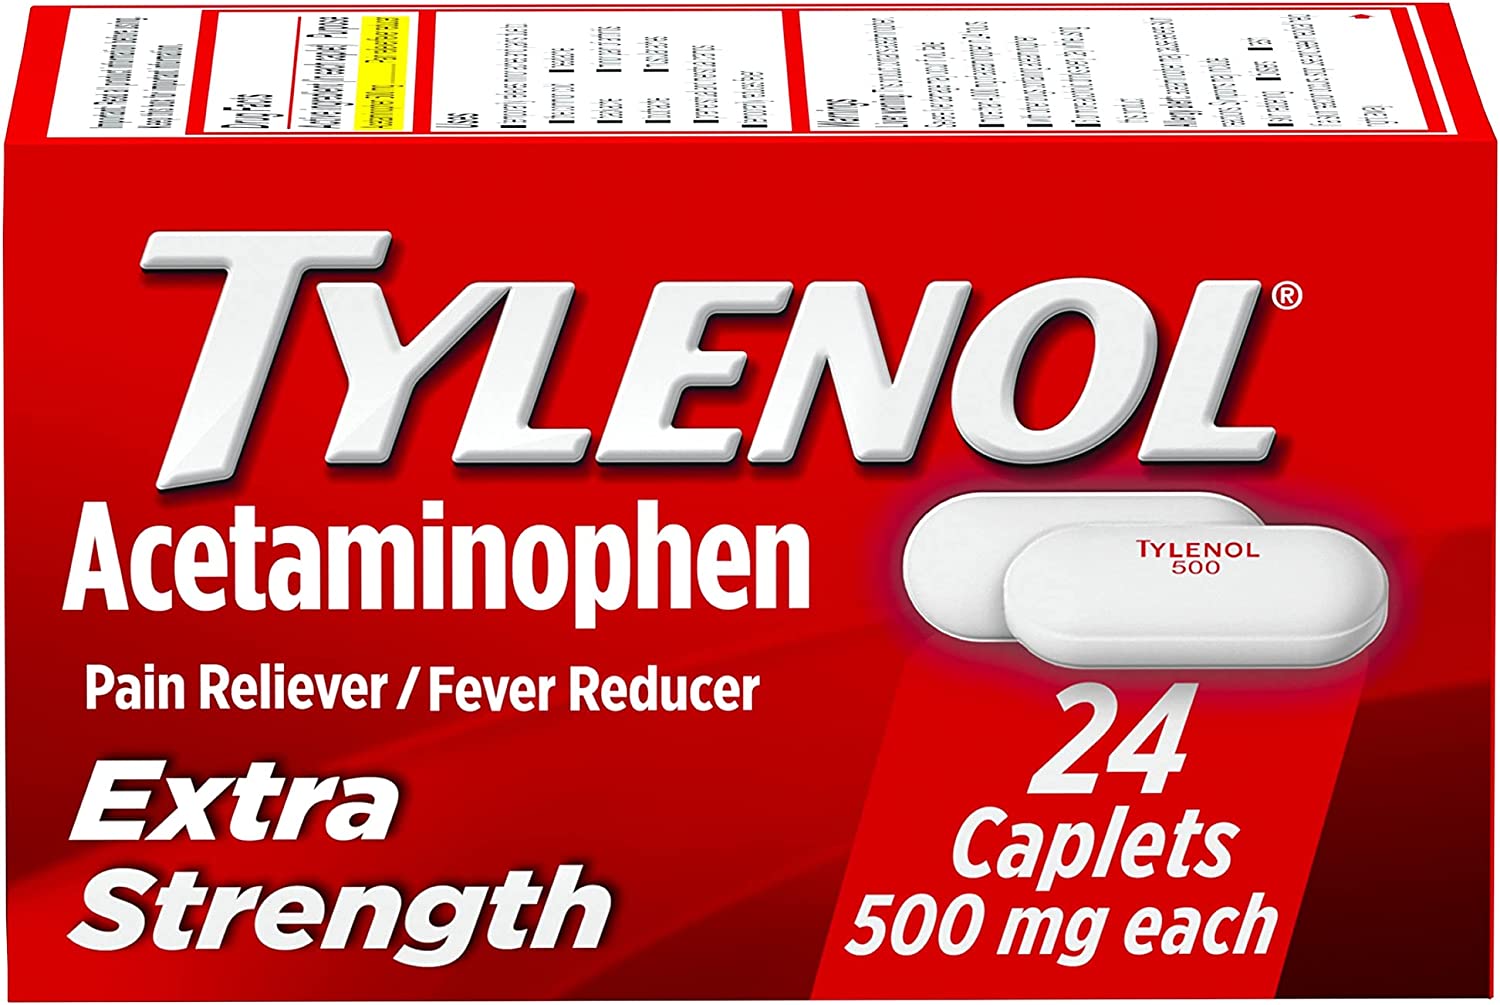 Tylenol Extra Strength Caplets with 500 mg Acetaminophen, Pain Reliever & Fever Reducer - 24 Count